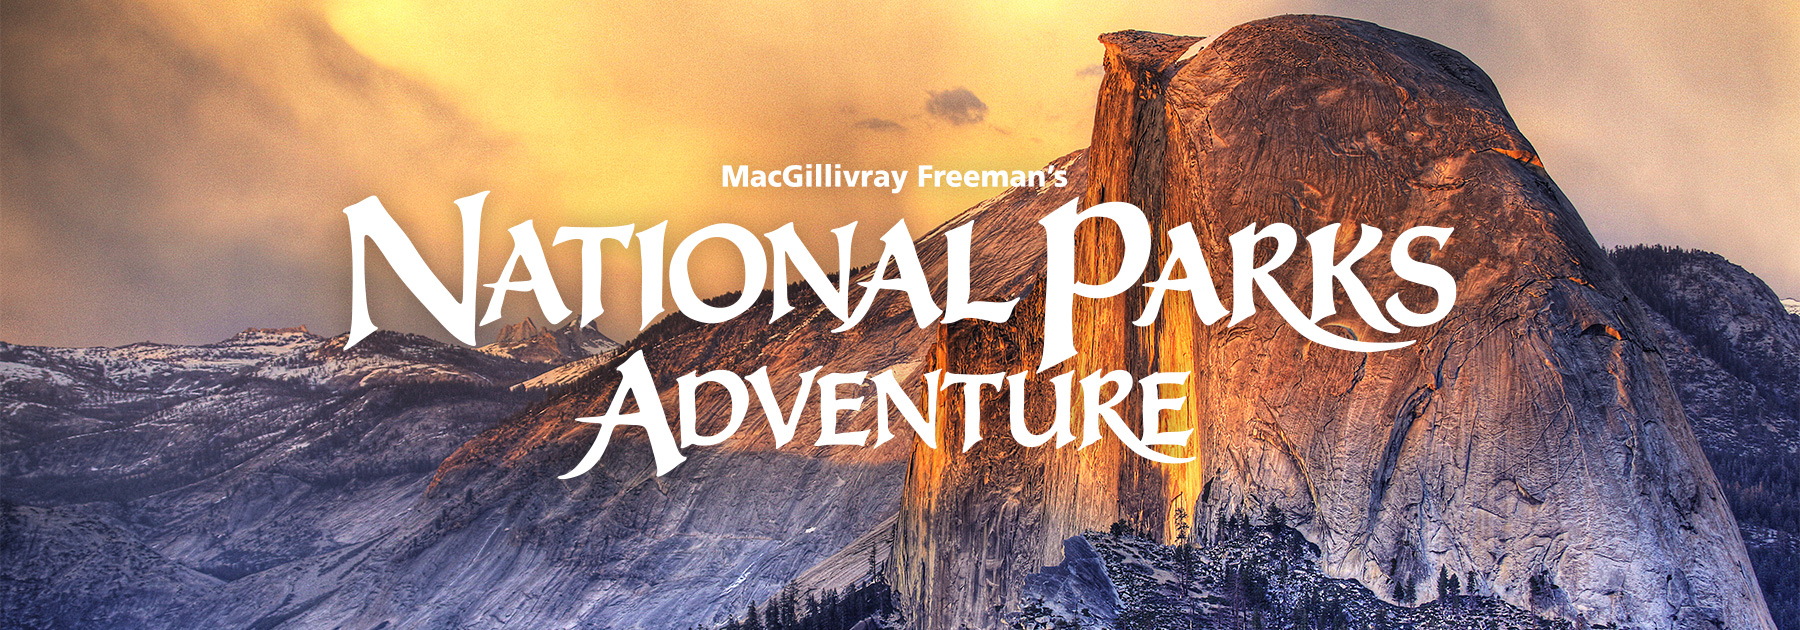 Promotional image from the omnimax film National Parks Adventure